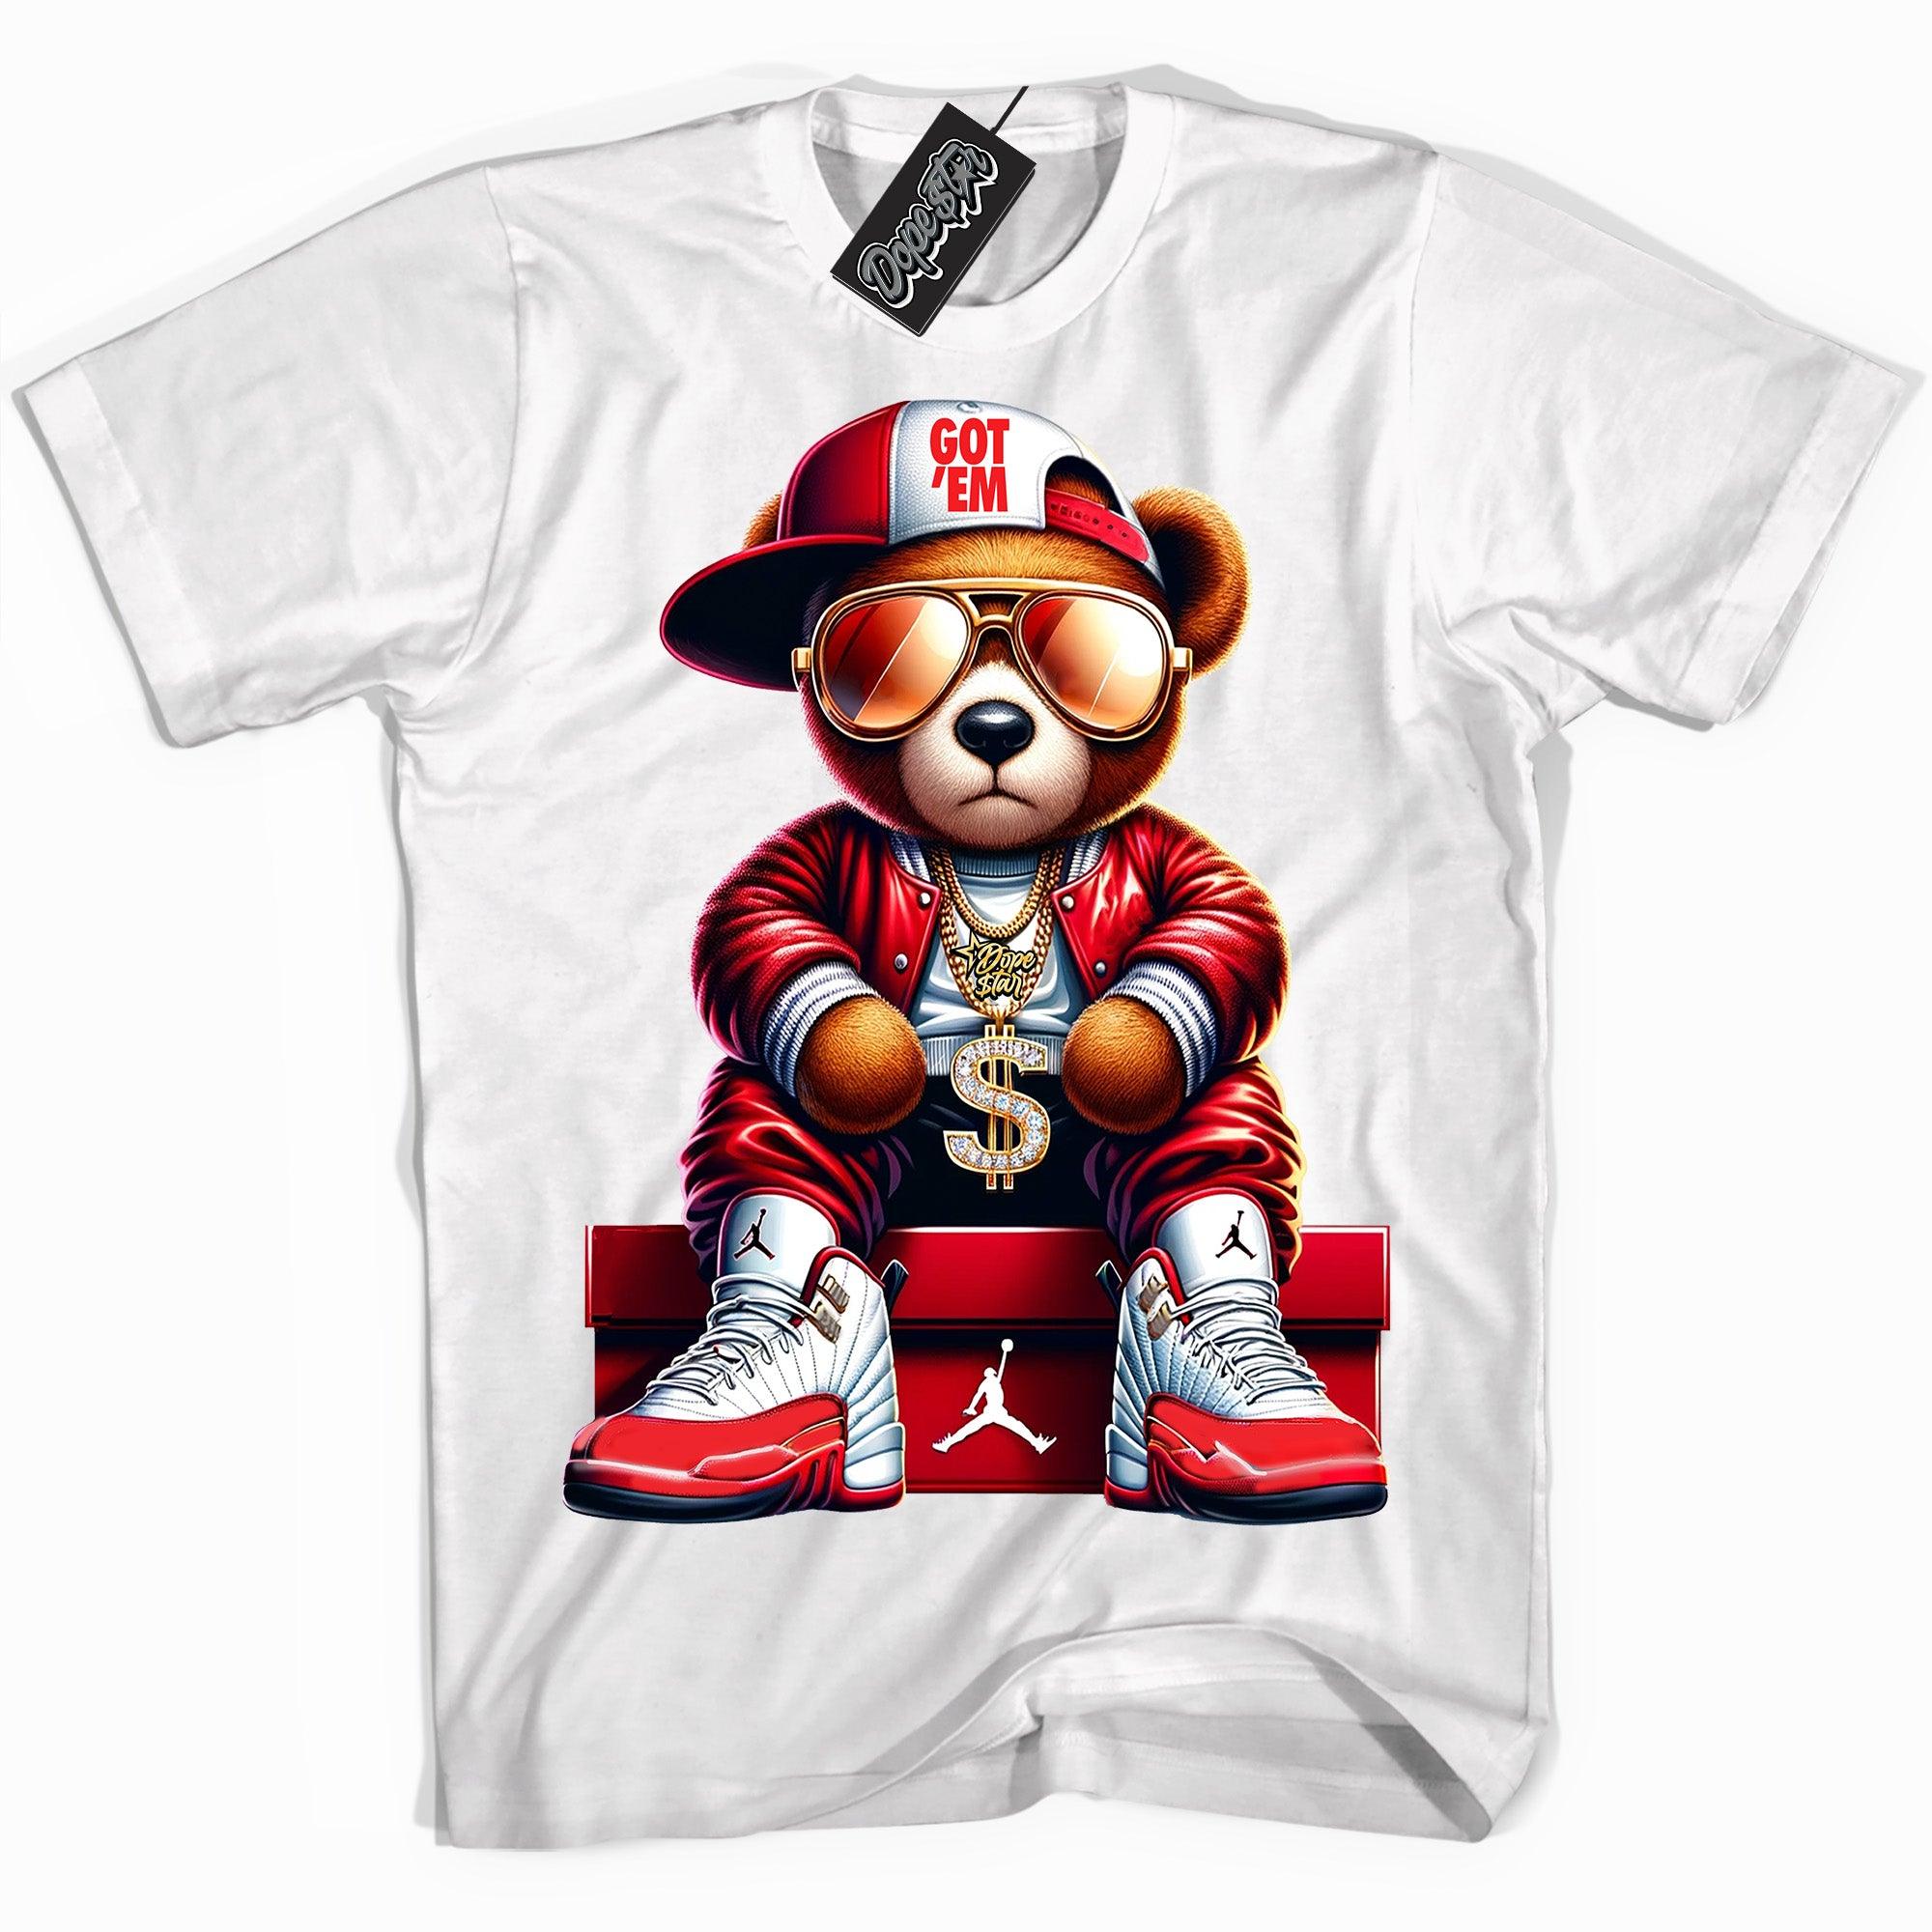 Cool White graphic tee with “ Get Em Bear ” print, that perfectly matches Air Jordan 12 Cherry sneakers 